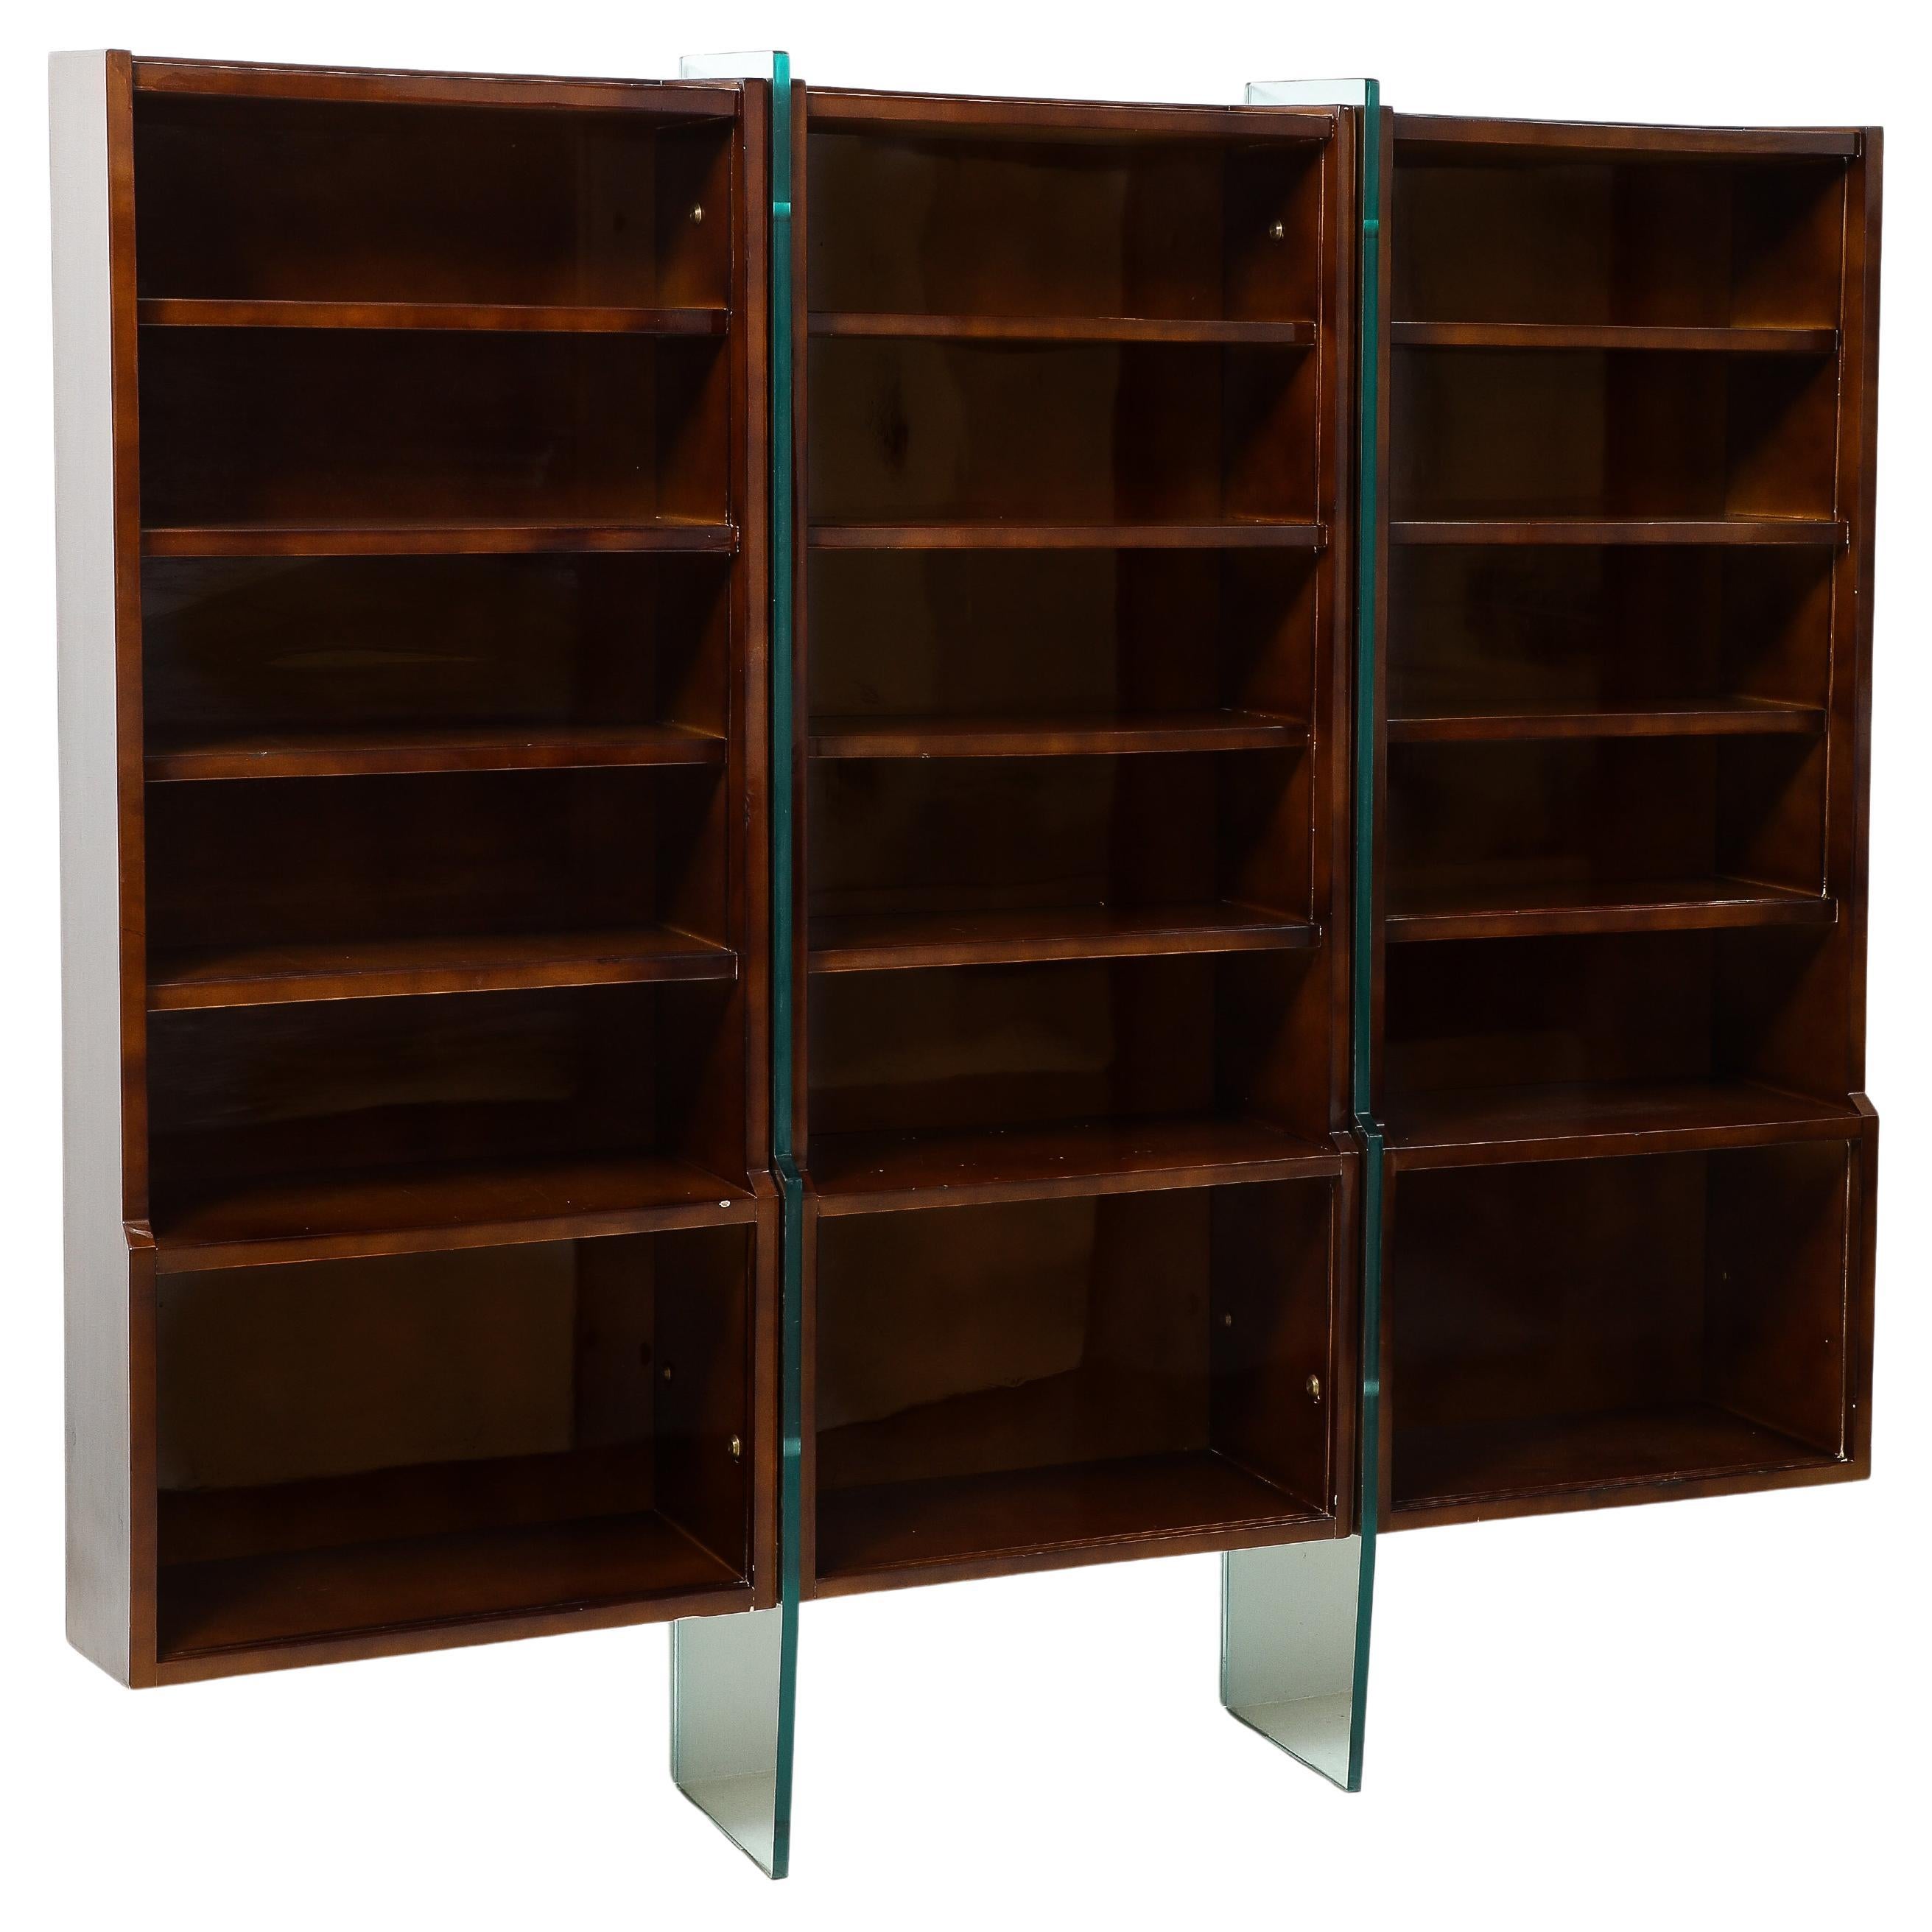 Raphael Raphel Bookcase in Lacquered Wood & Glass, France 1950's For Sale